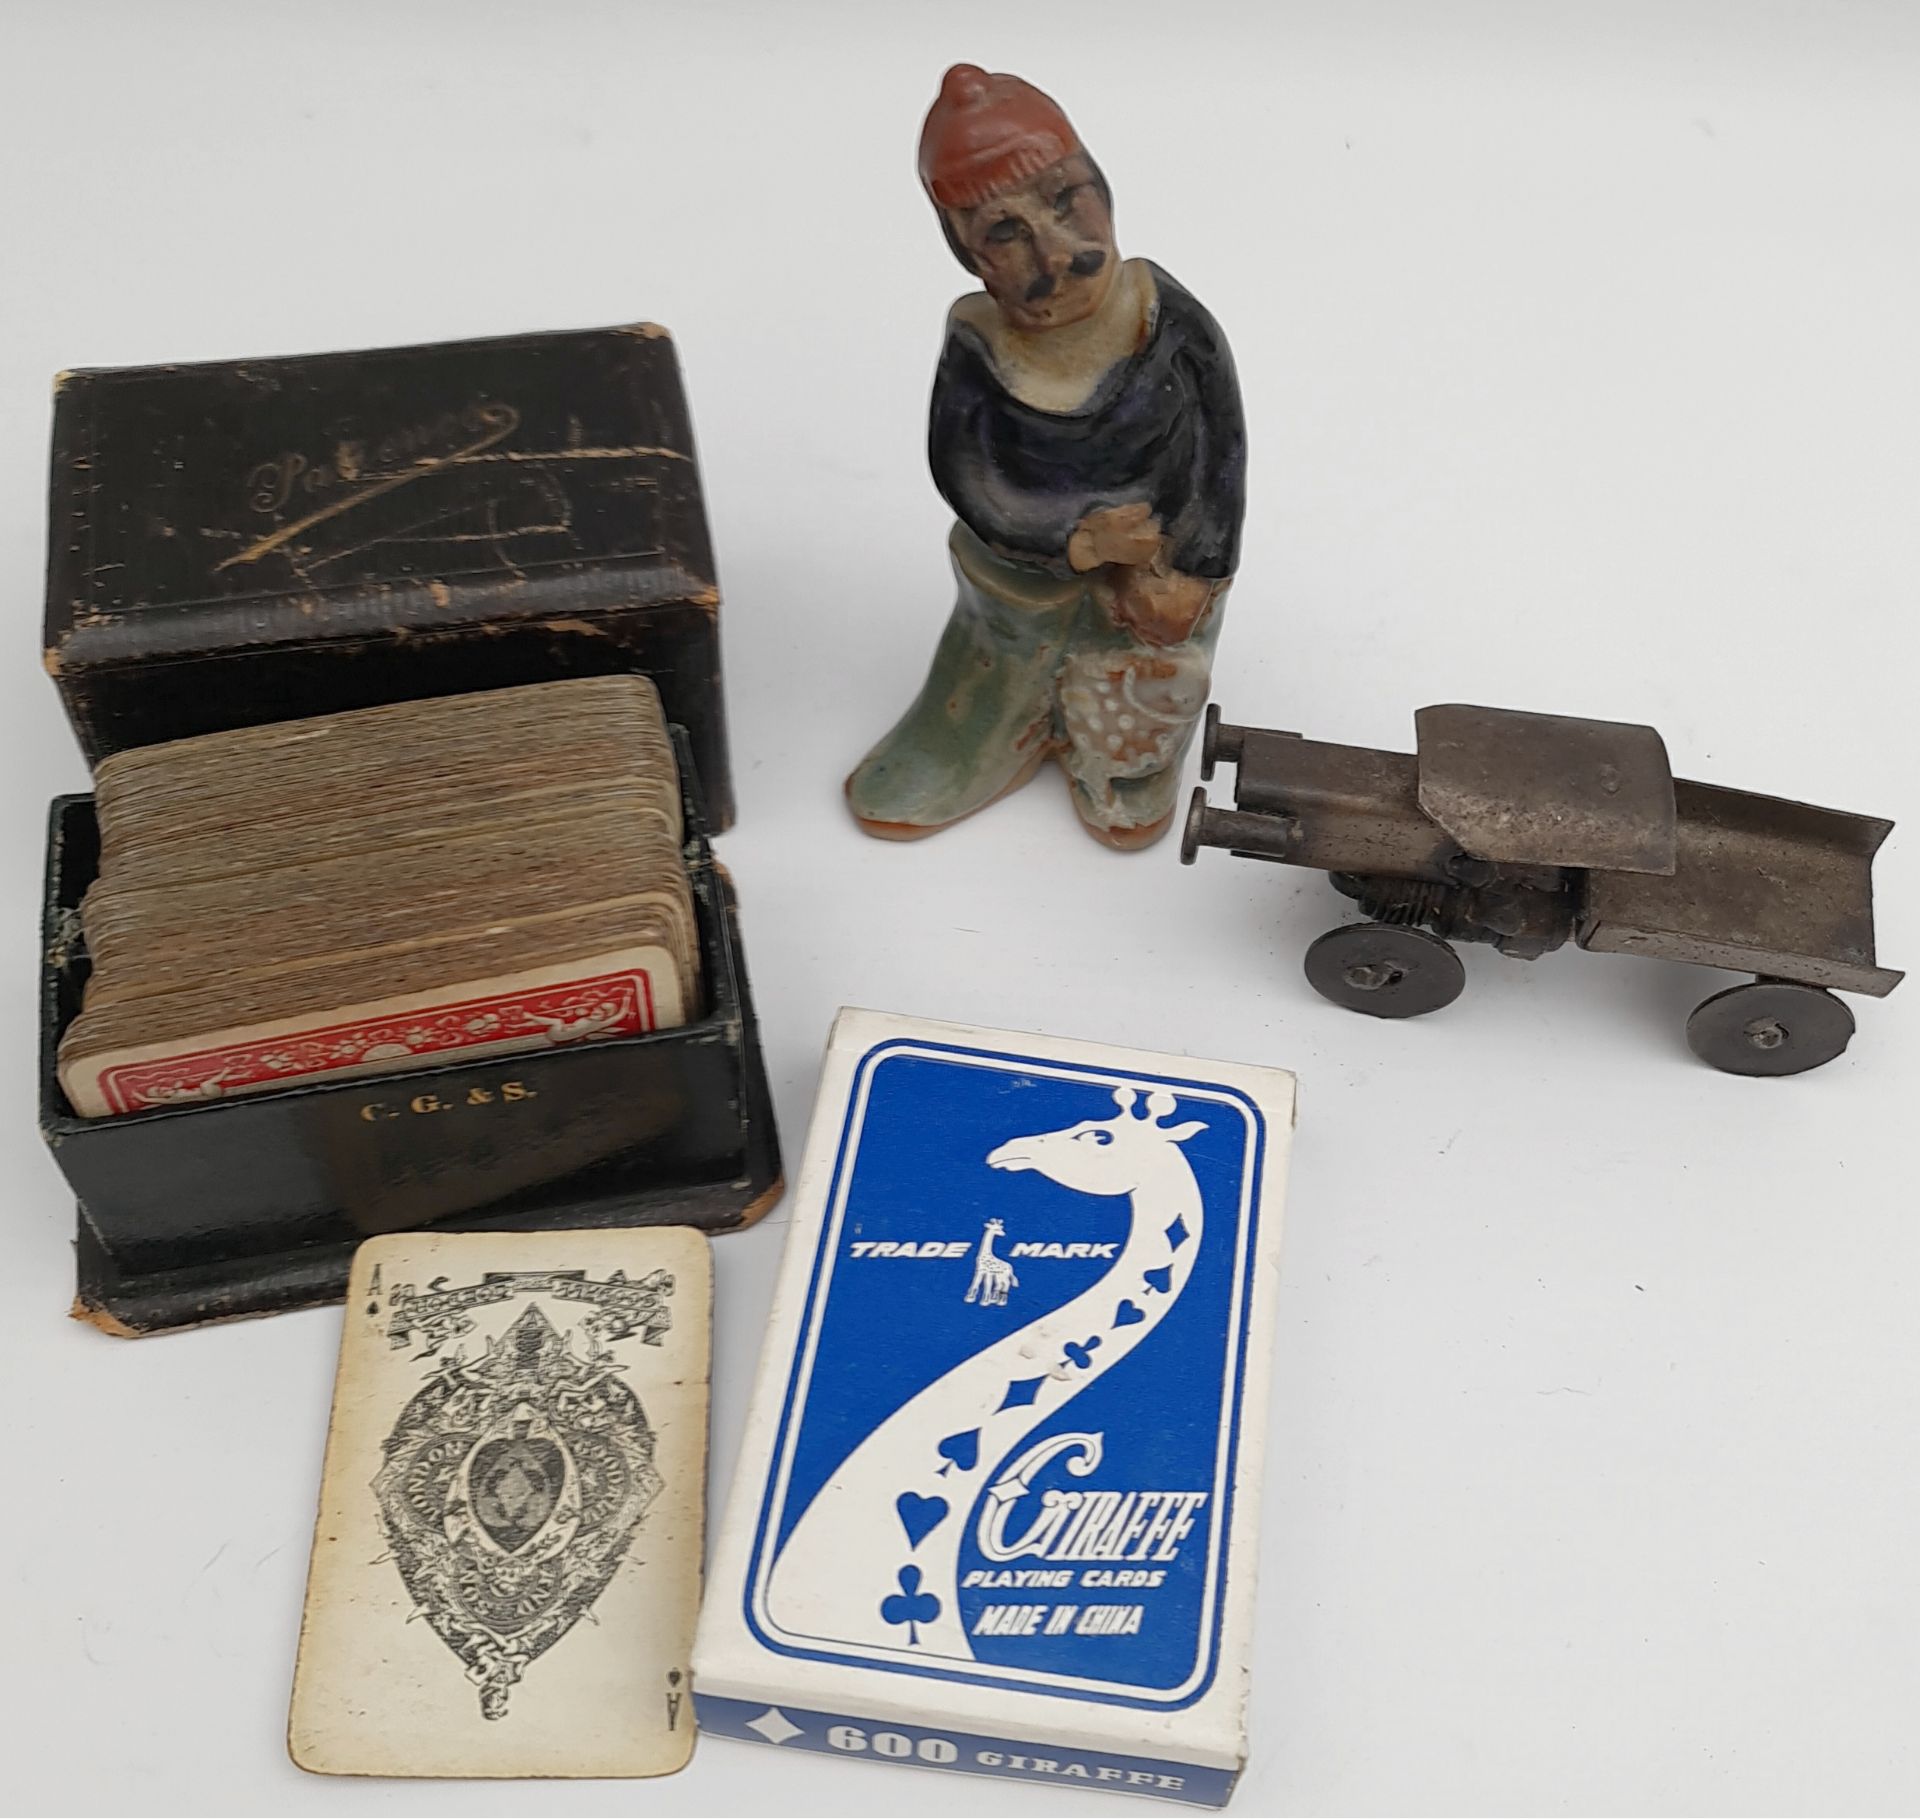 Vintage Parcel of Items Includes Tremar Pottery Playing Cards etc